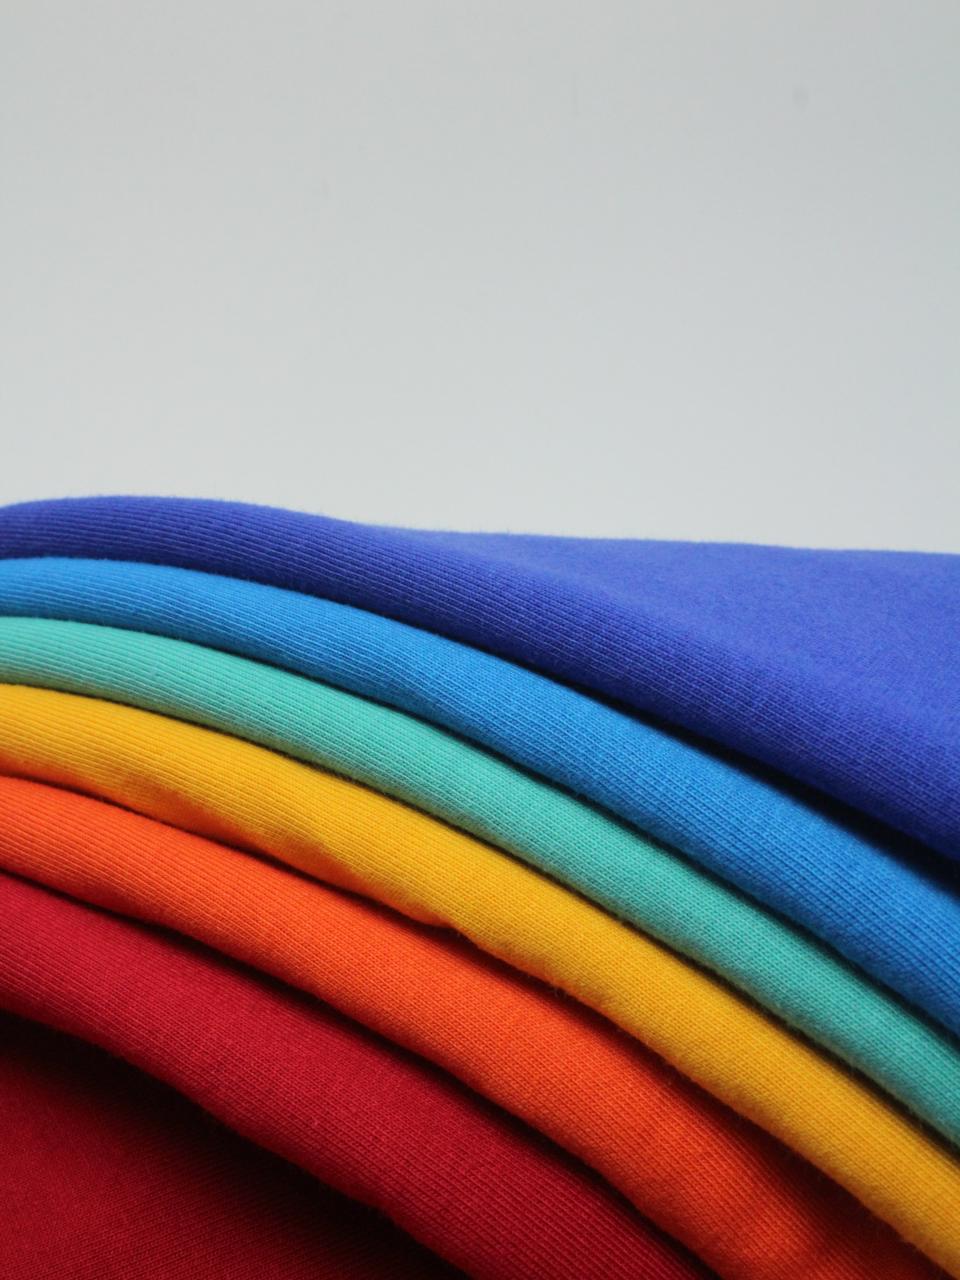 A Comprehensive Guide to Types of Fabrics Used in Apparel Manufacturing